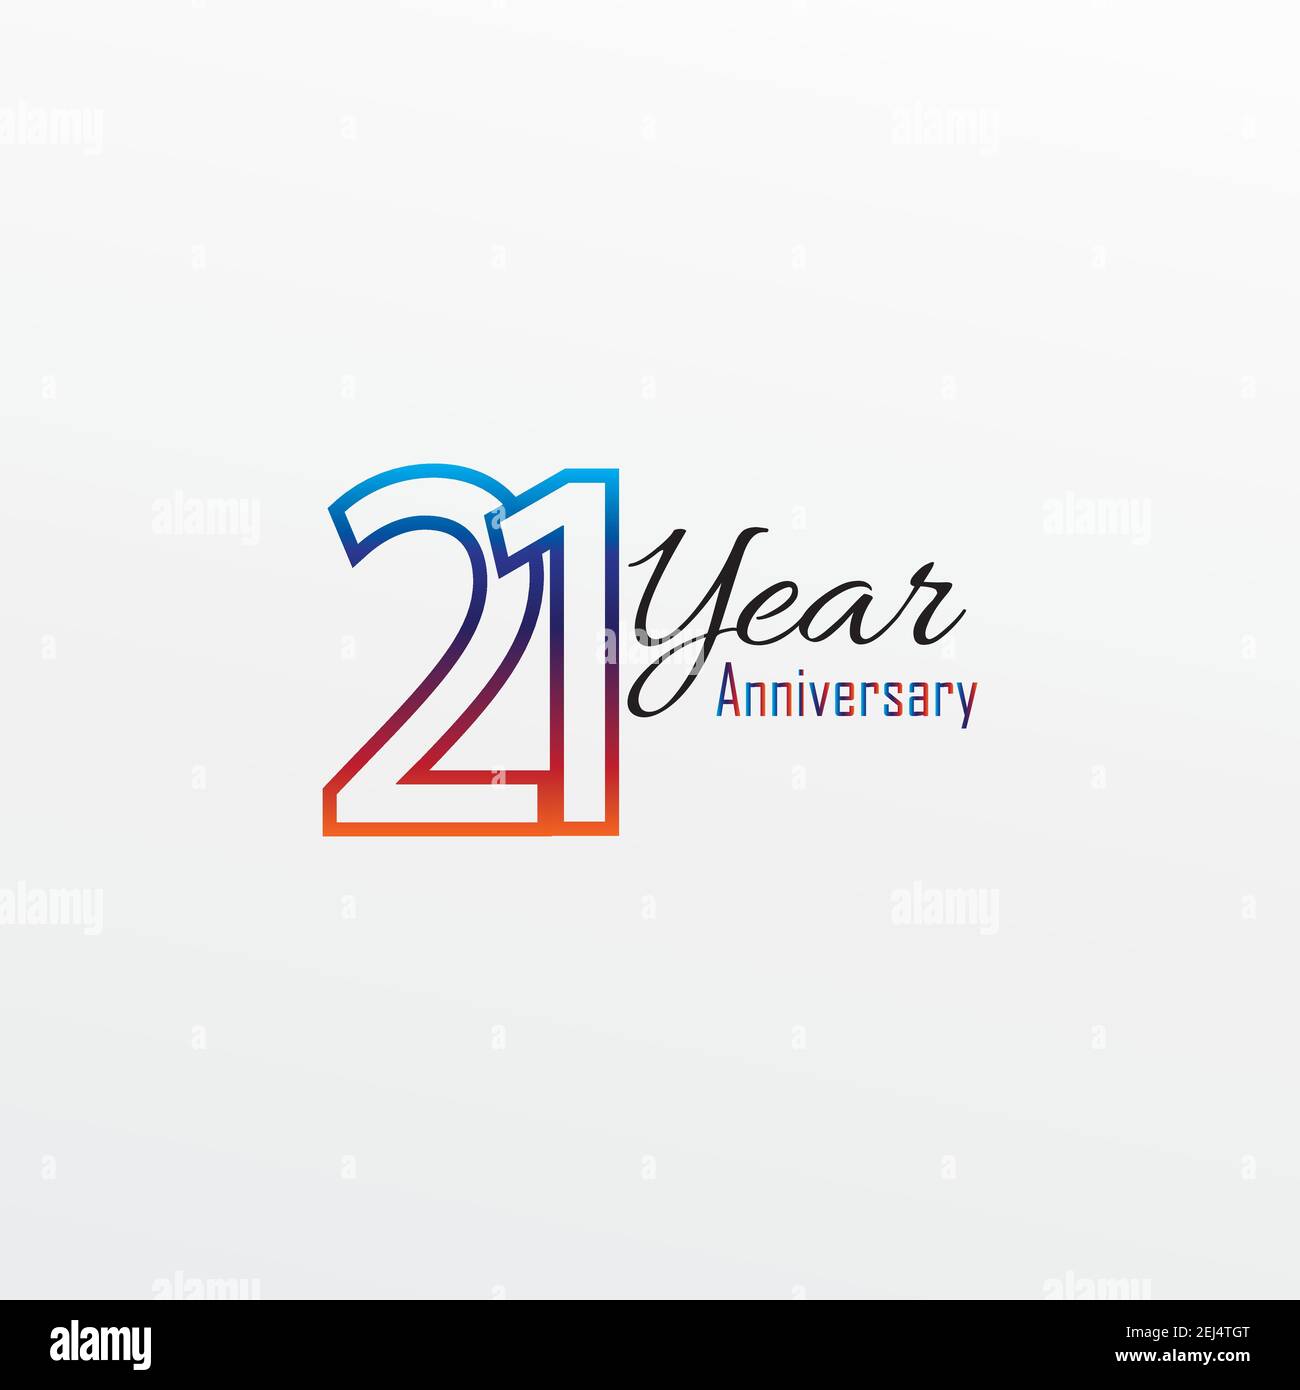 21 years anniversary celebration blue Colors Comical Design logotype. anniversary logo isolated on White background, vector Horizontal number design f Stock Vector